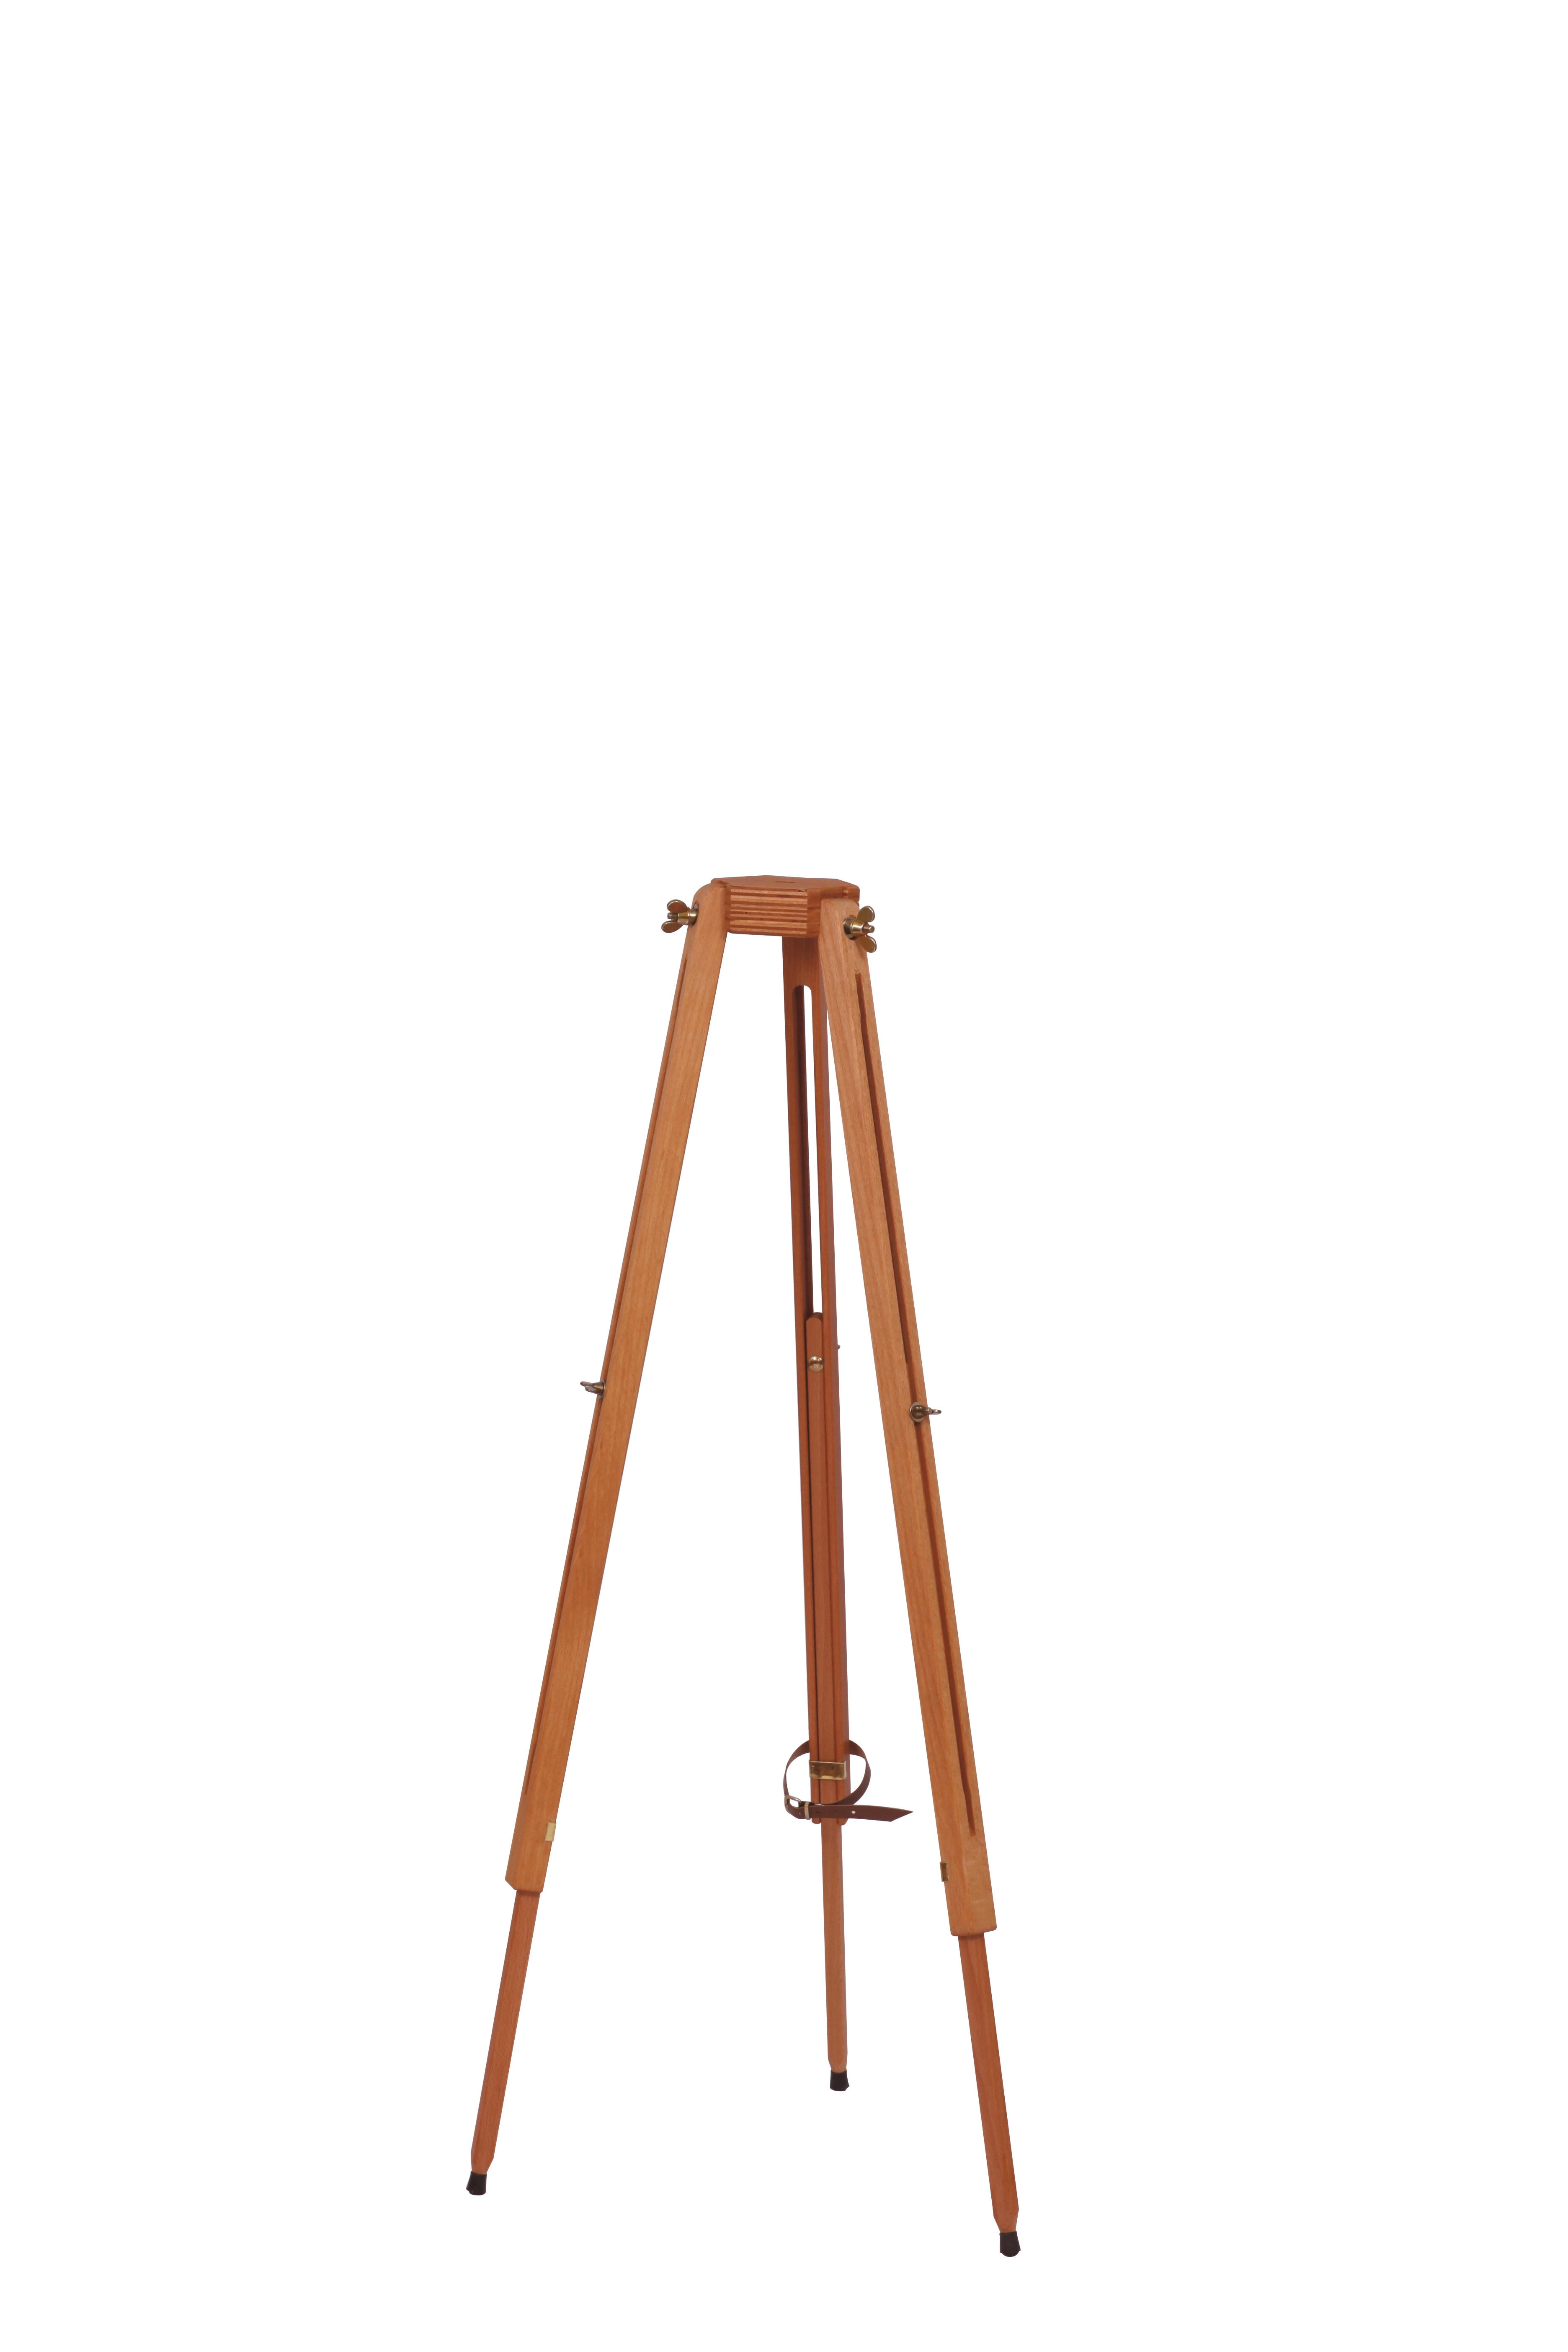 MABEF Universal Folding Wooden Travel Easel for sale online